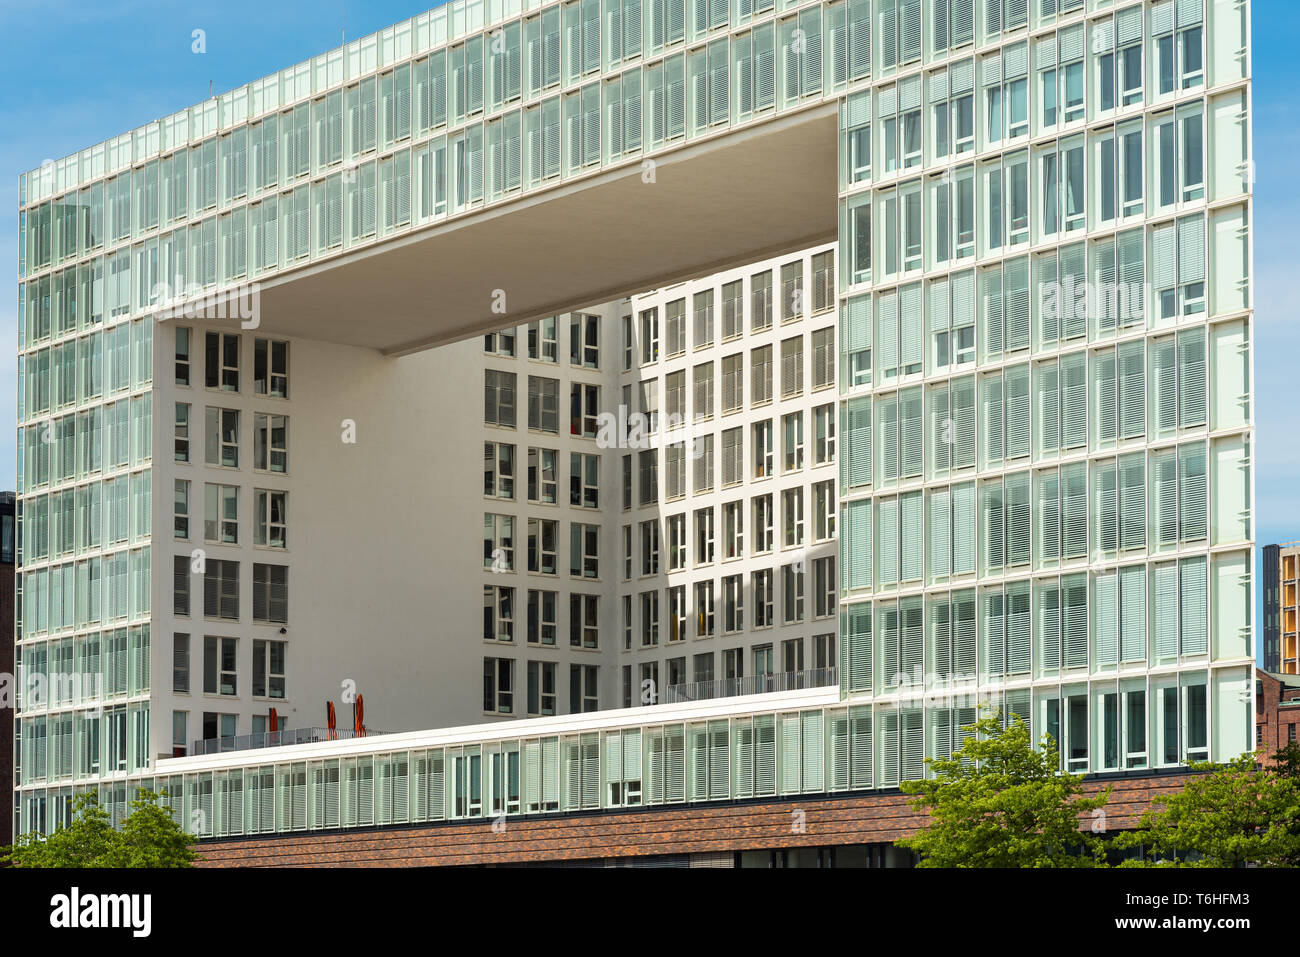 Sophisticated architecture and extraordinary buildings in the HafenCity Hamburg Stock Photo